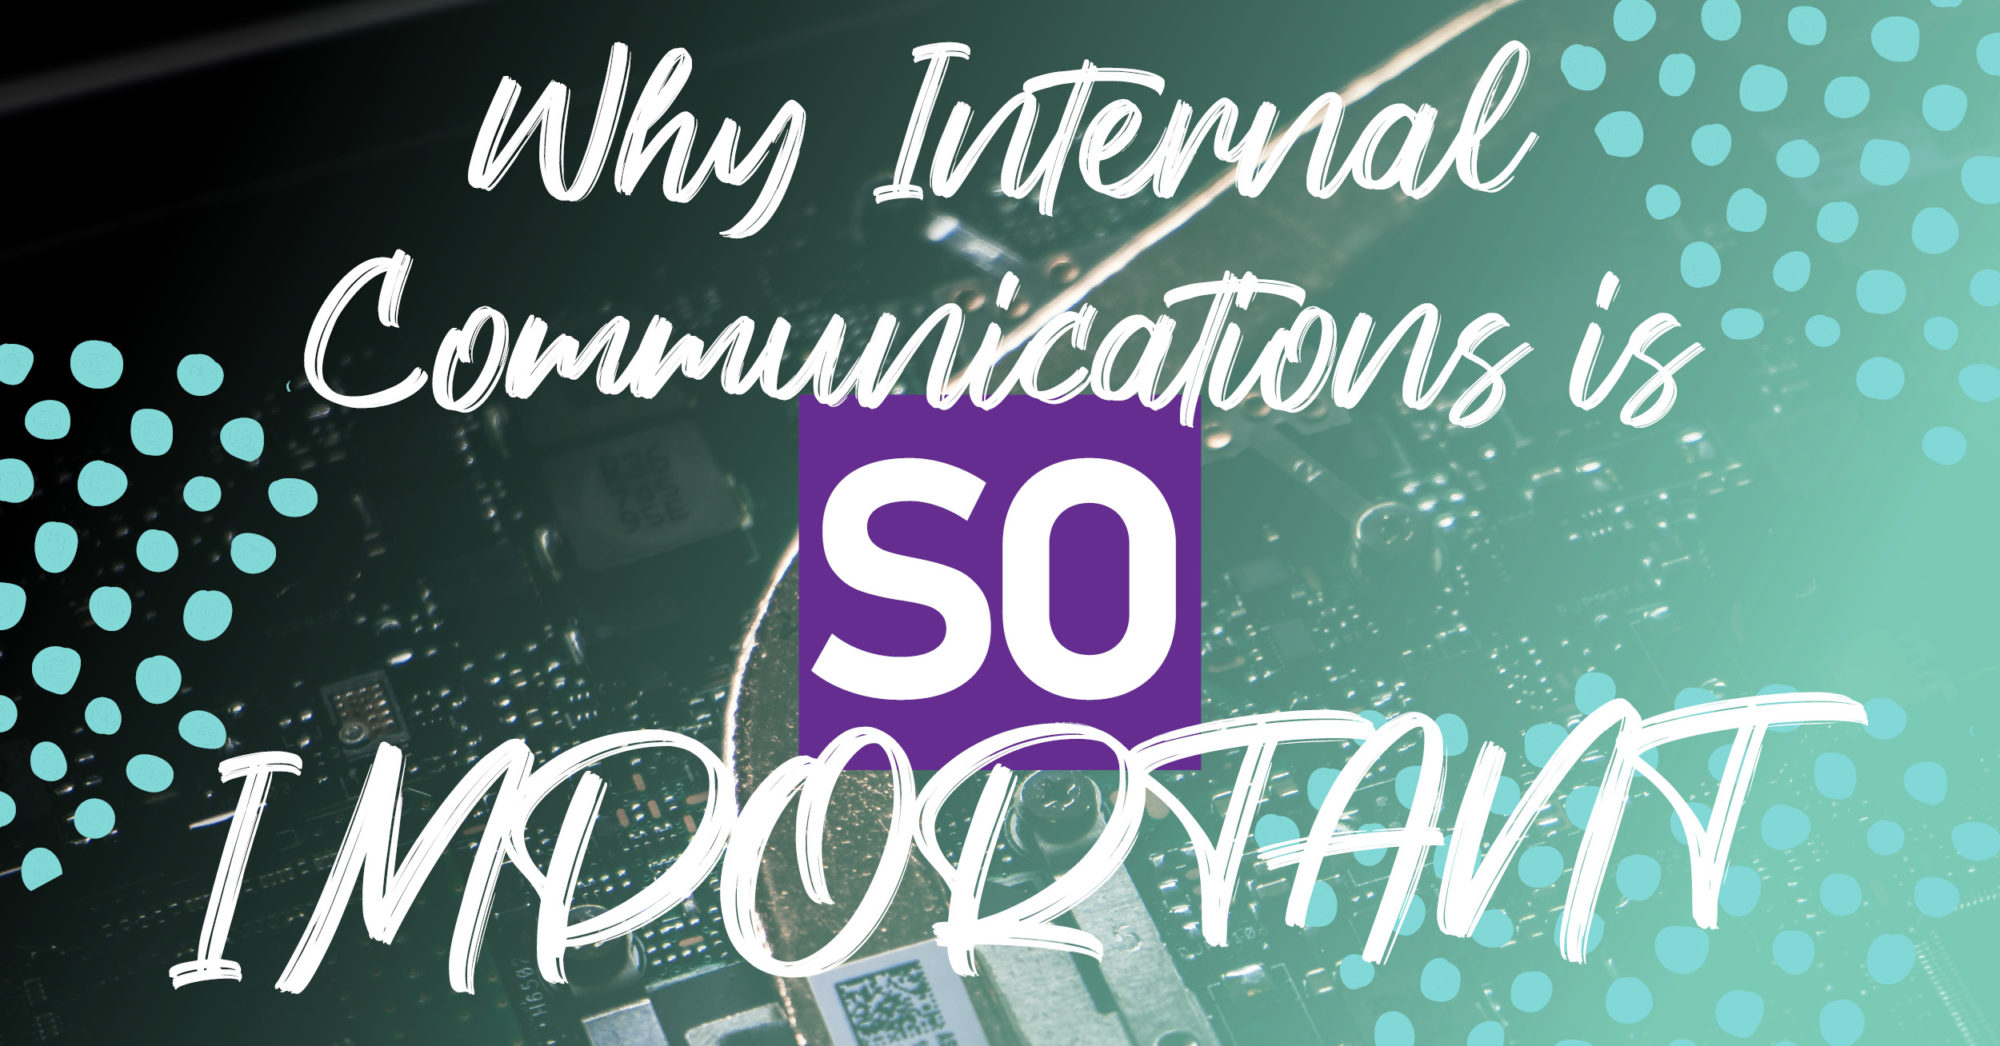 The text "Why Internal Communication is so important" in white overtop of a green background with mint green dots on each side